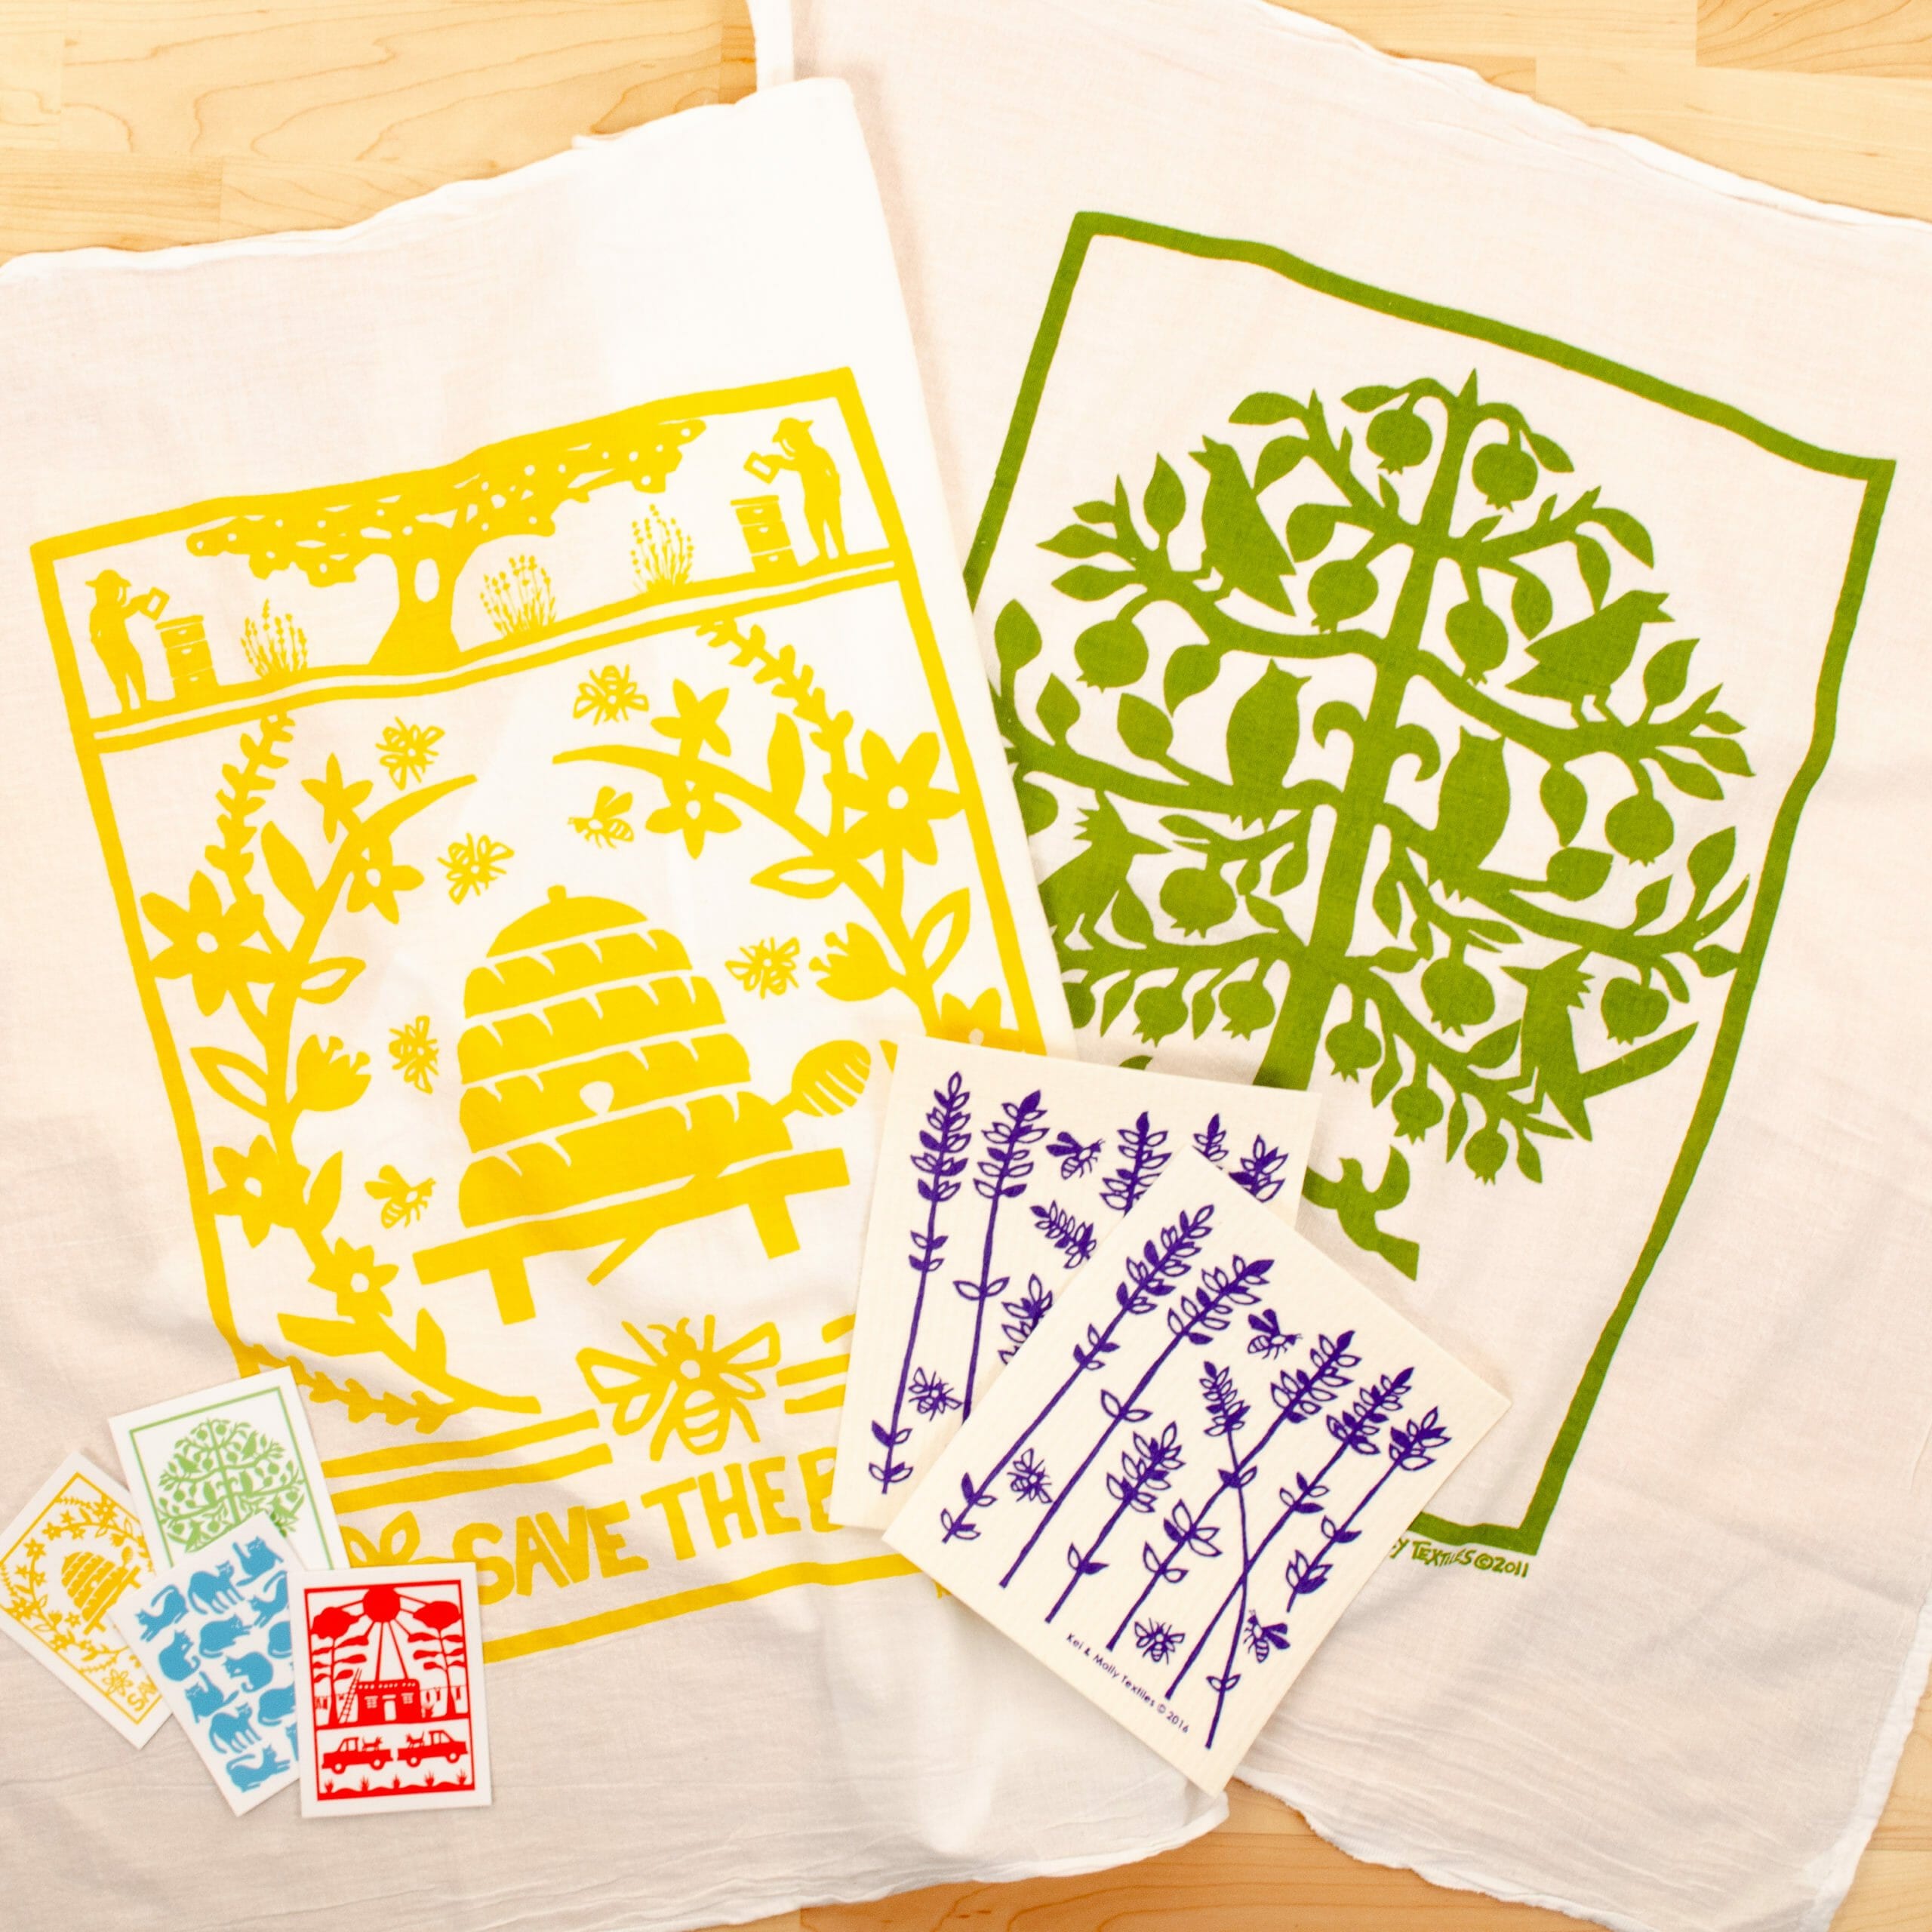 One Simply Terrific Thing: A Discount On Our Favorite Flour Sack Towels!